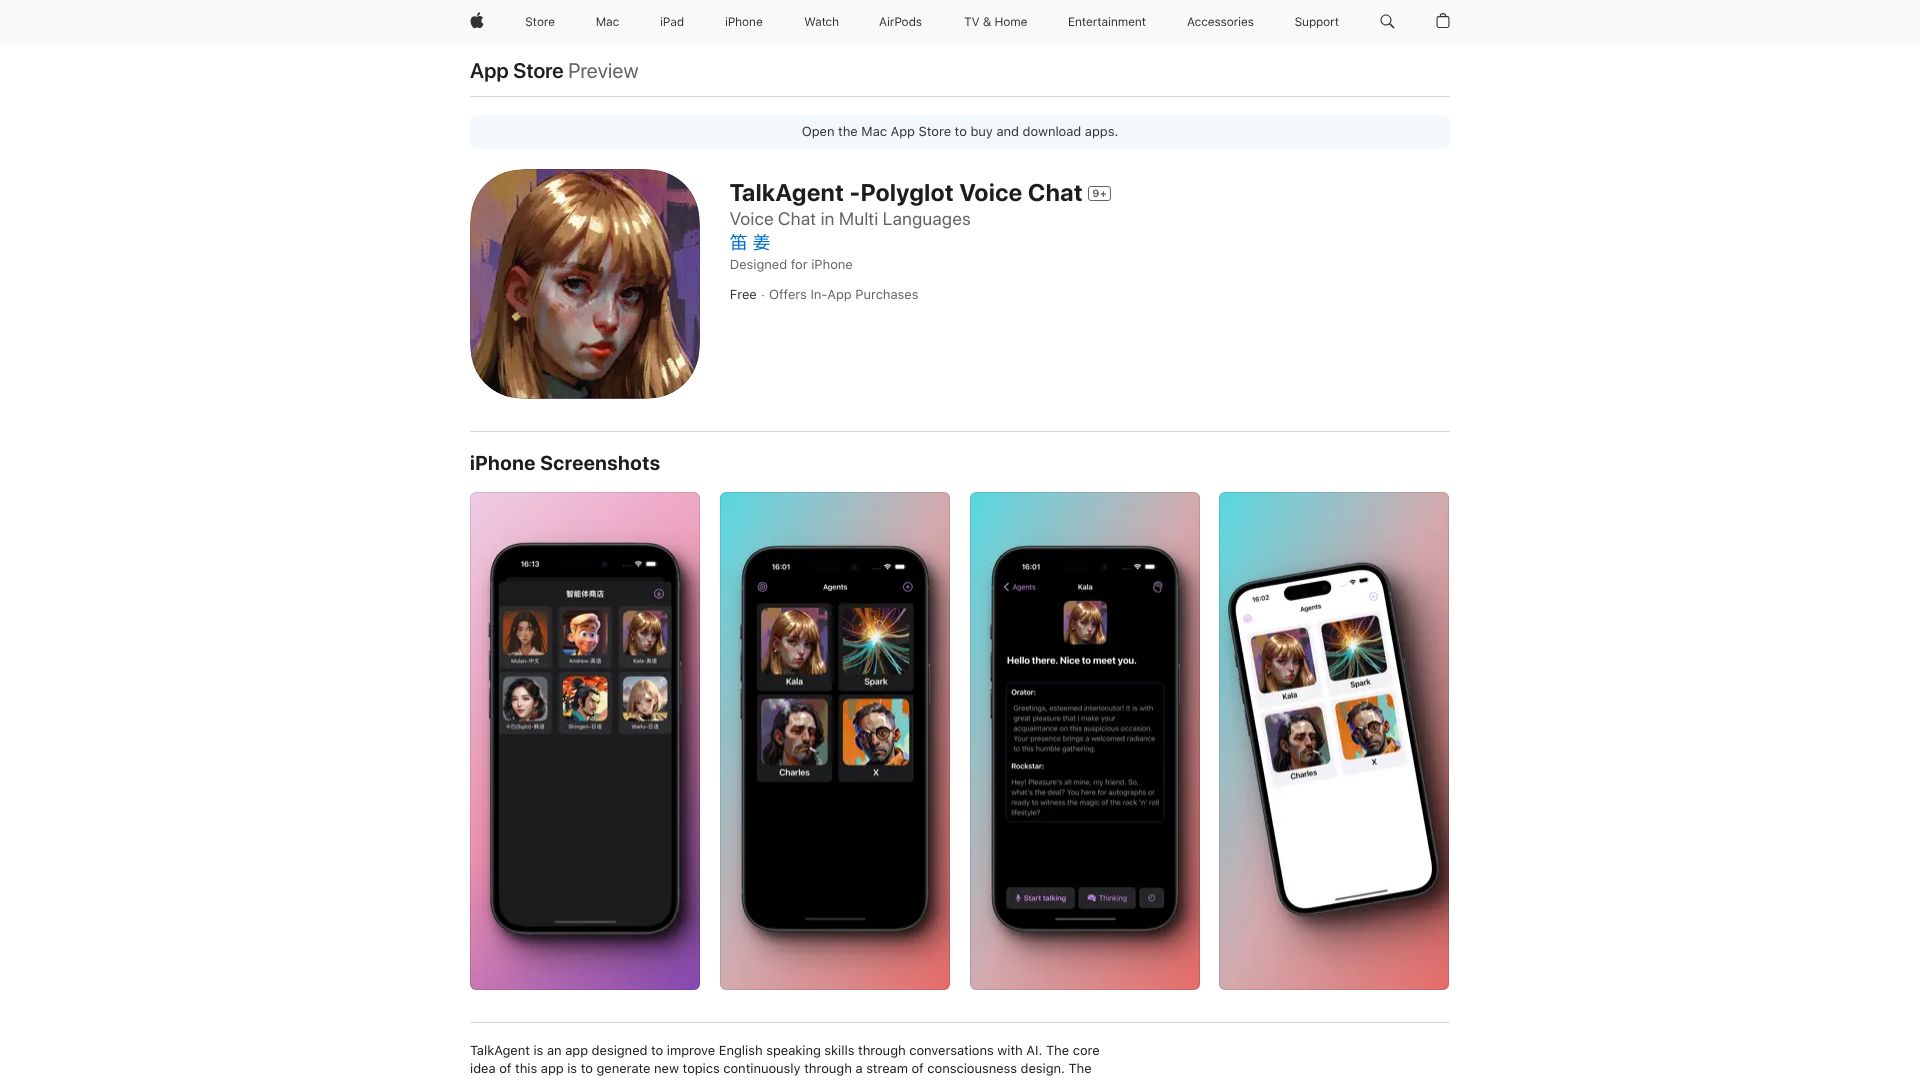 TalkAgent -Polyglot Voice Chat